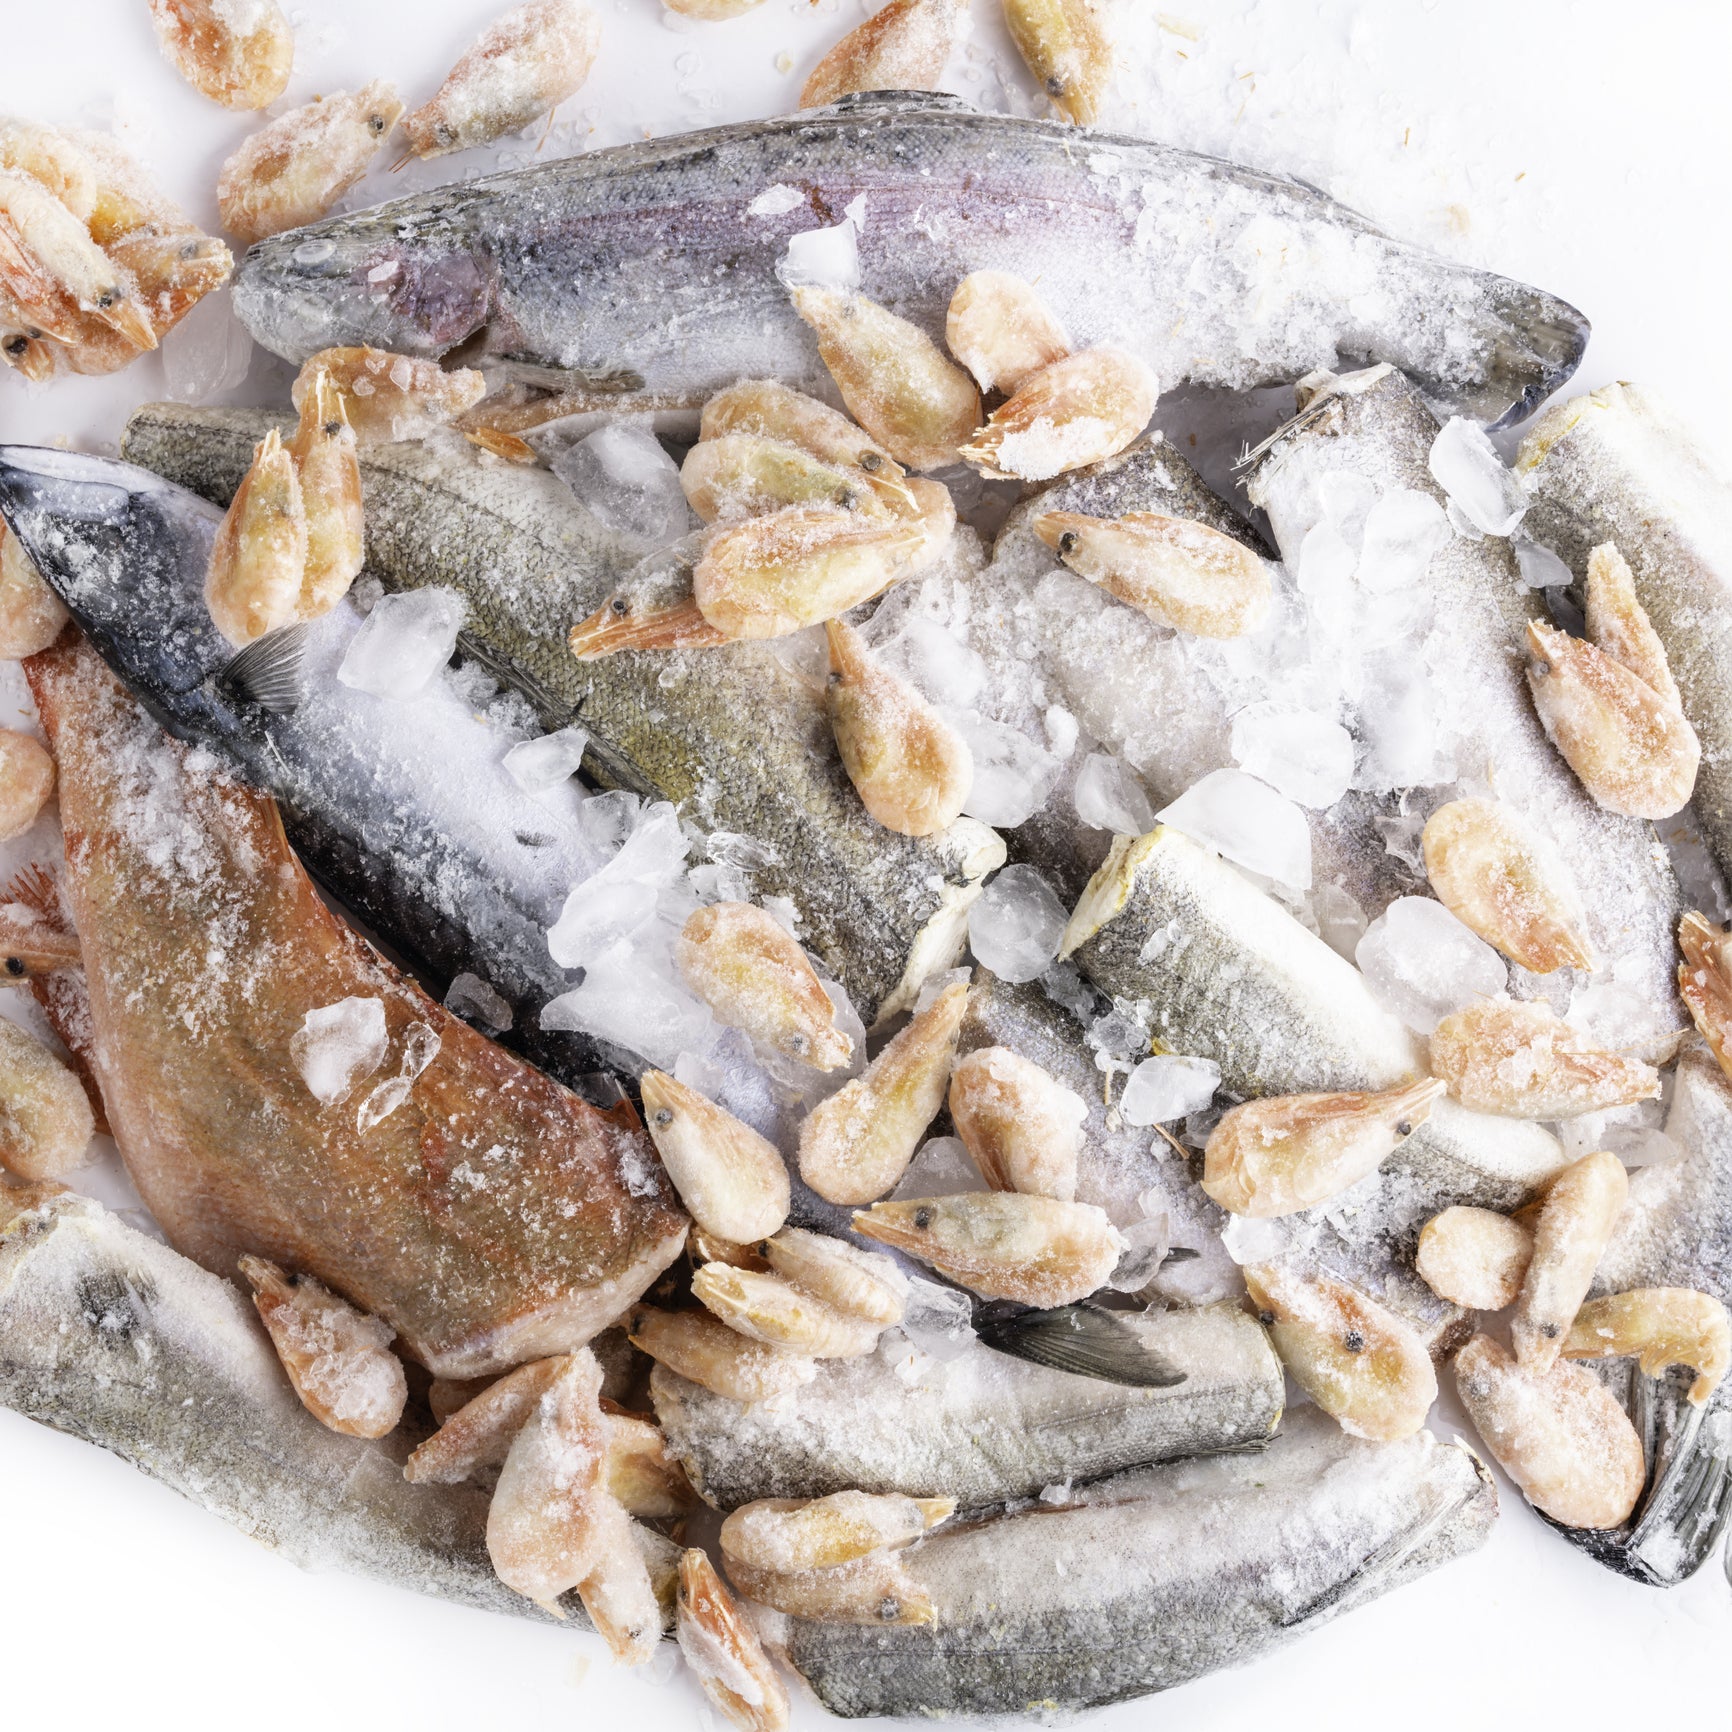 Pacific Whiting vs. Other Whitefish: What Makes it Stand Out